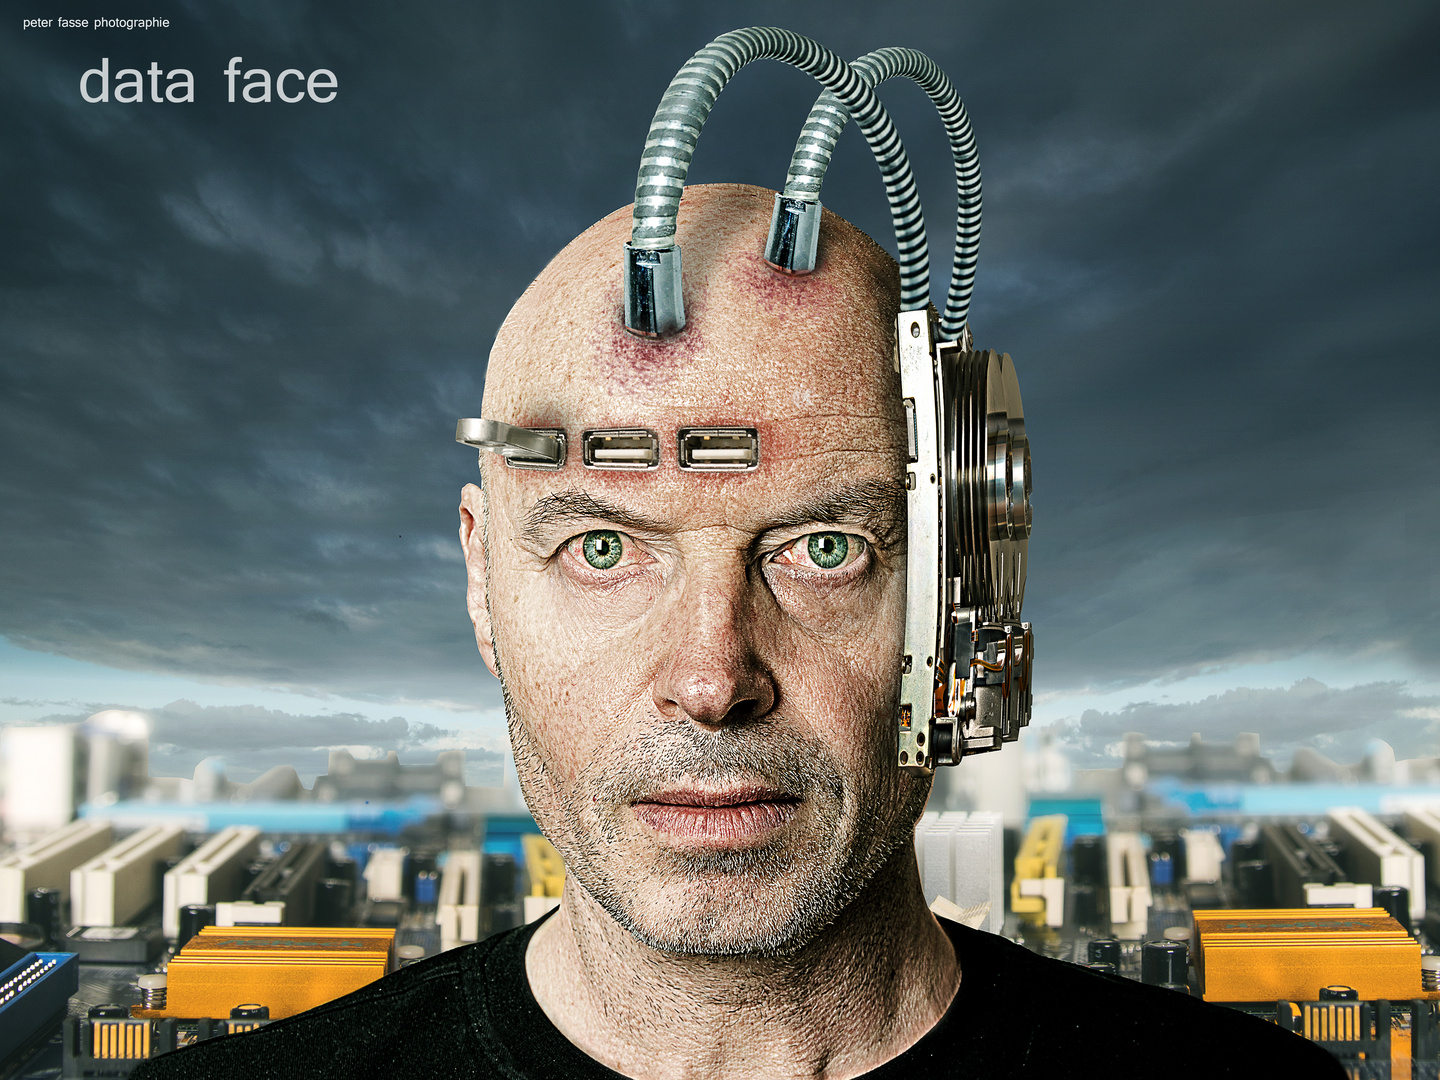 the data face